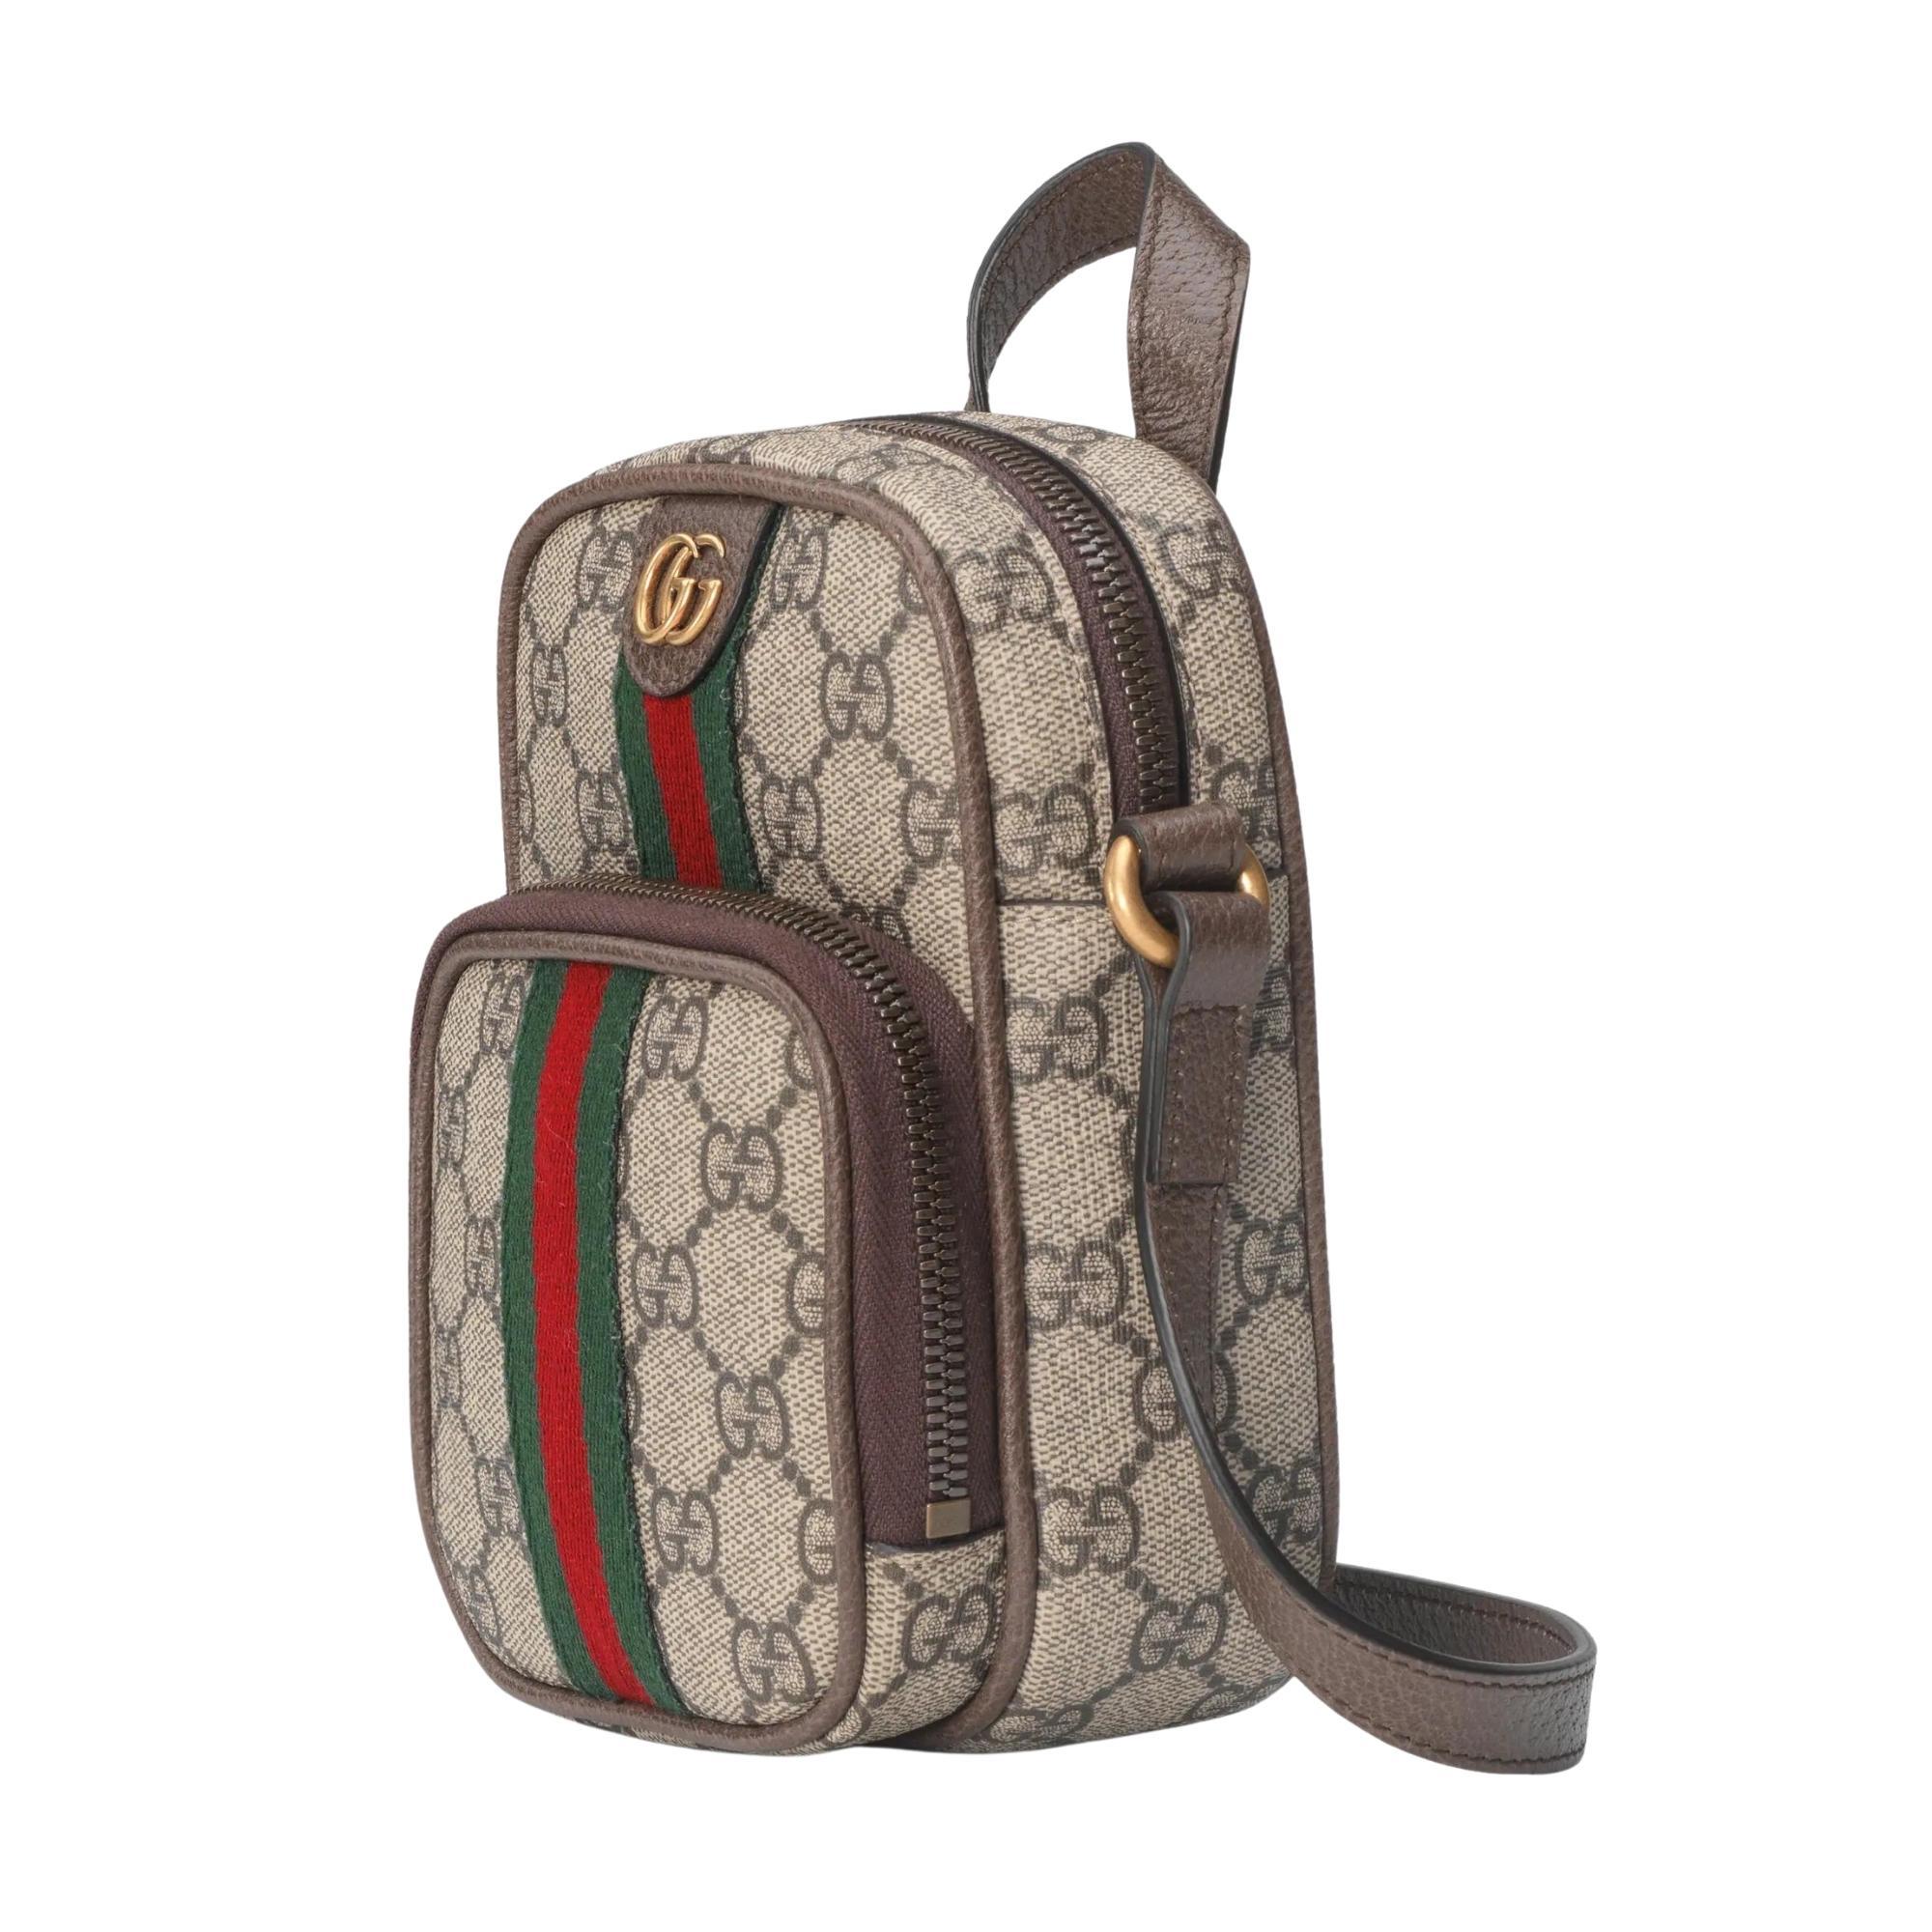 This bag is made with GG Supreme canvas in beige and ebony with brown leather trim. The bag features the classic green and red web at front, GG hardware, antique gold-toned hardware, a flat leather top handle, a shoulder strap and a front